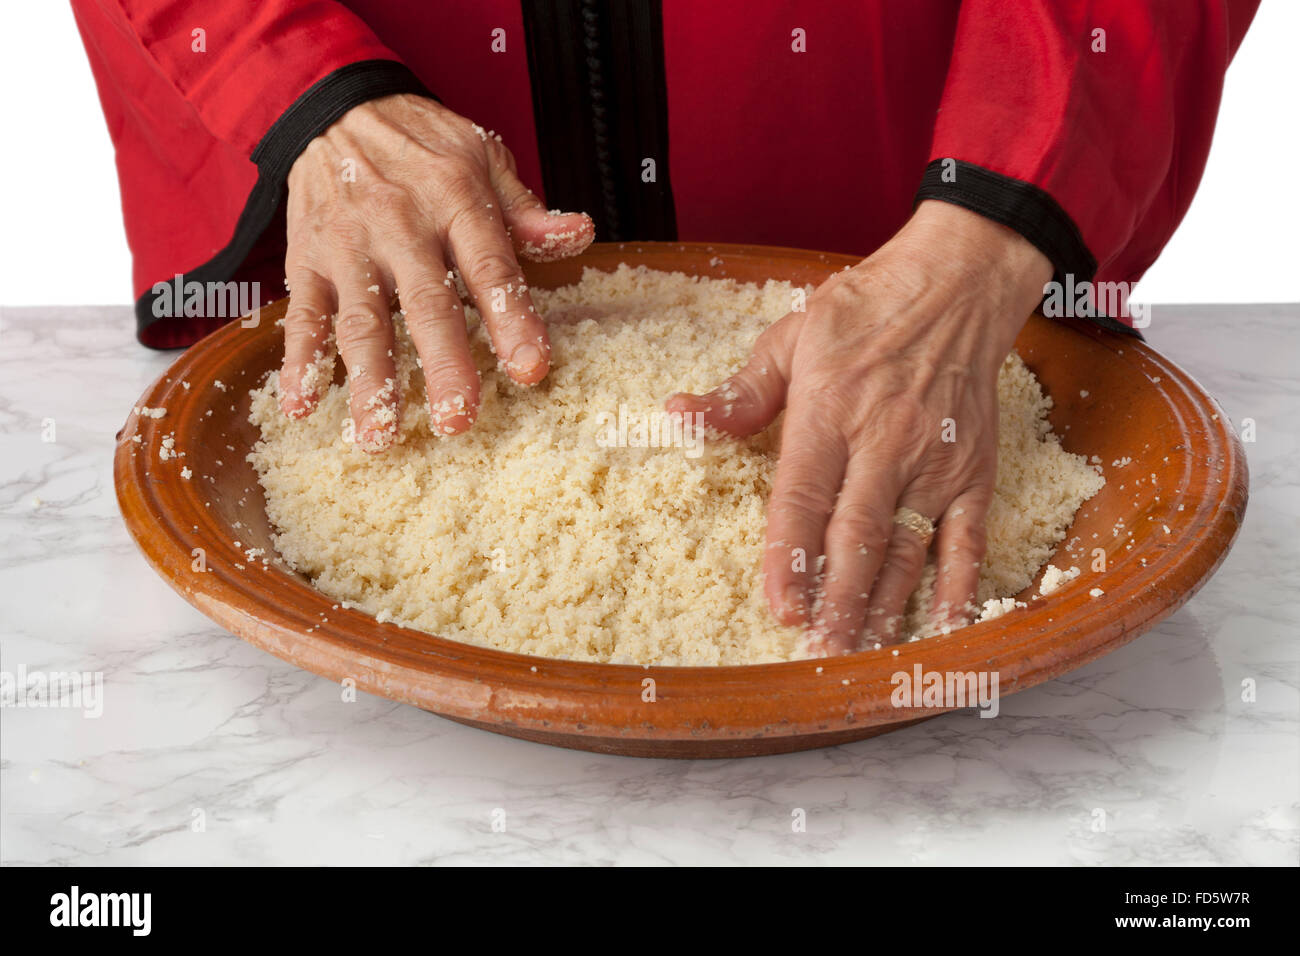 Women's hands making traditional Moroccan couscous Stock Photo